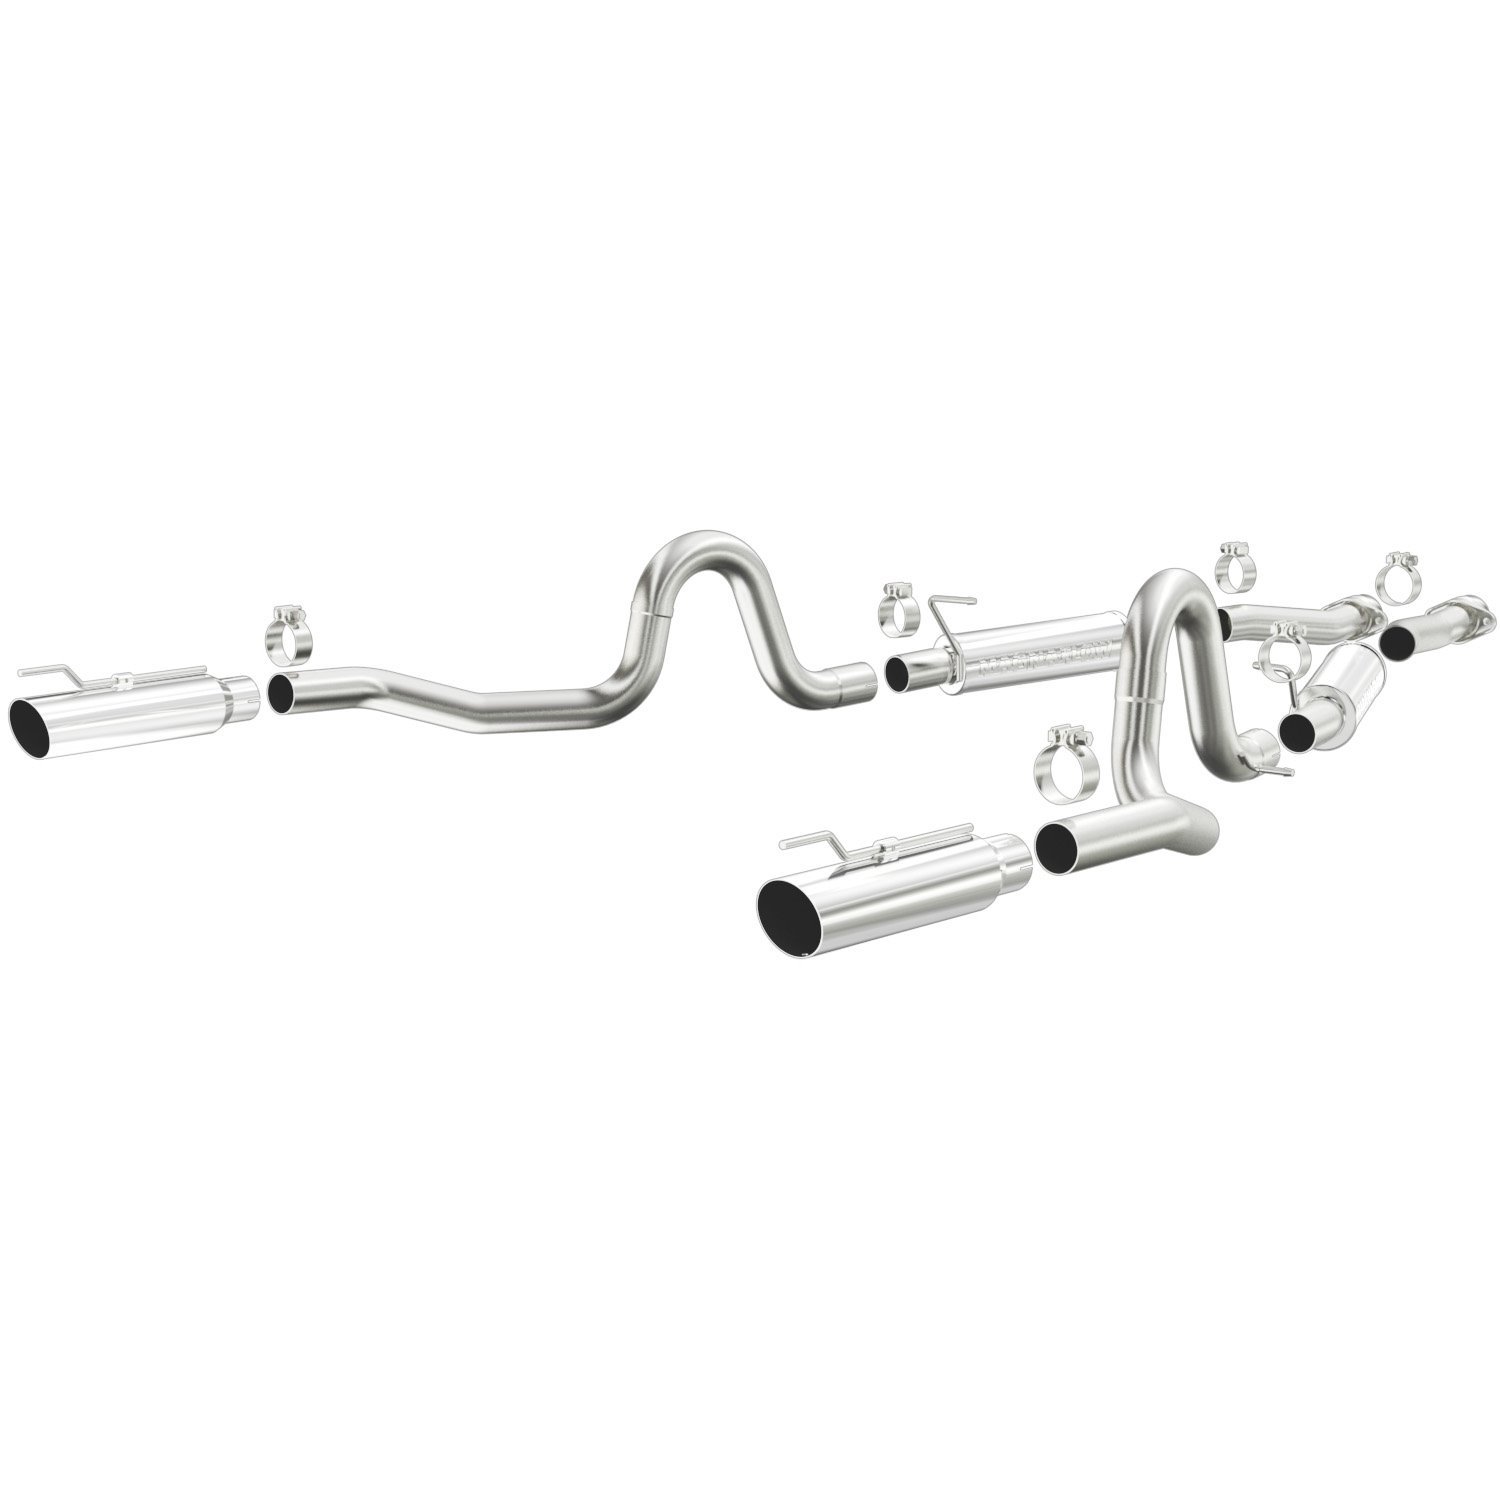 Competition Series Cat-Back Exhaust System 1994-1995 Mustang